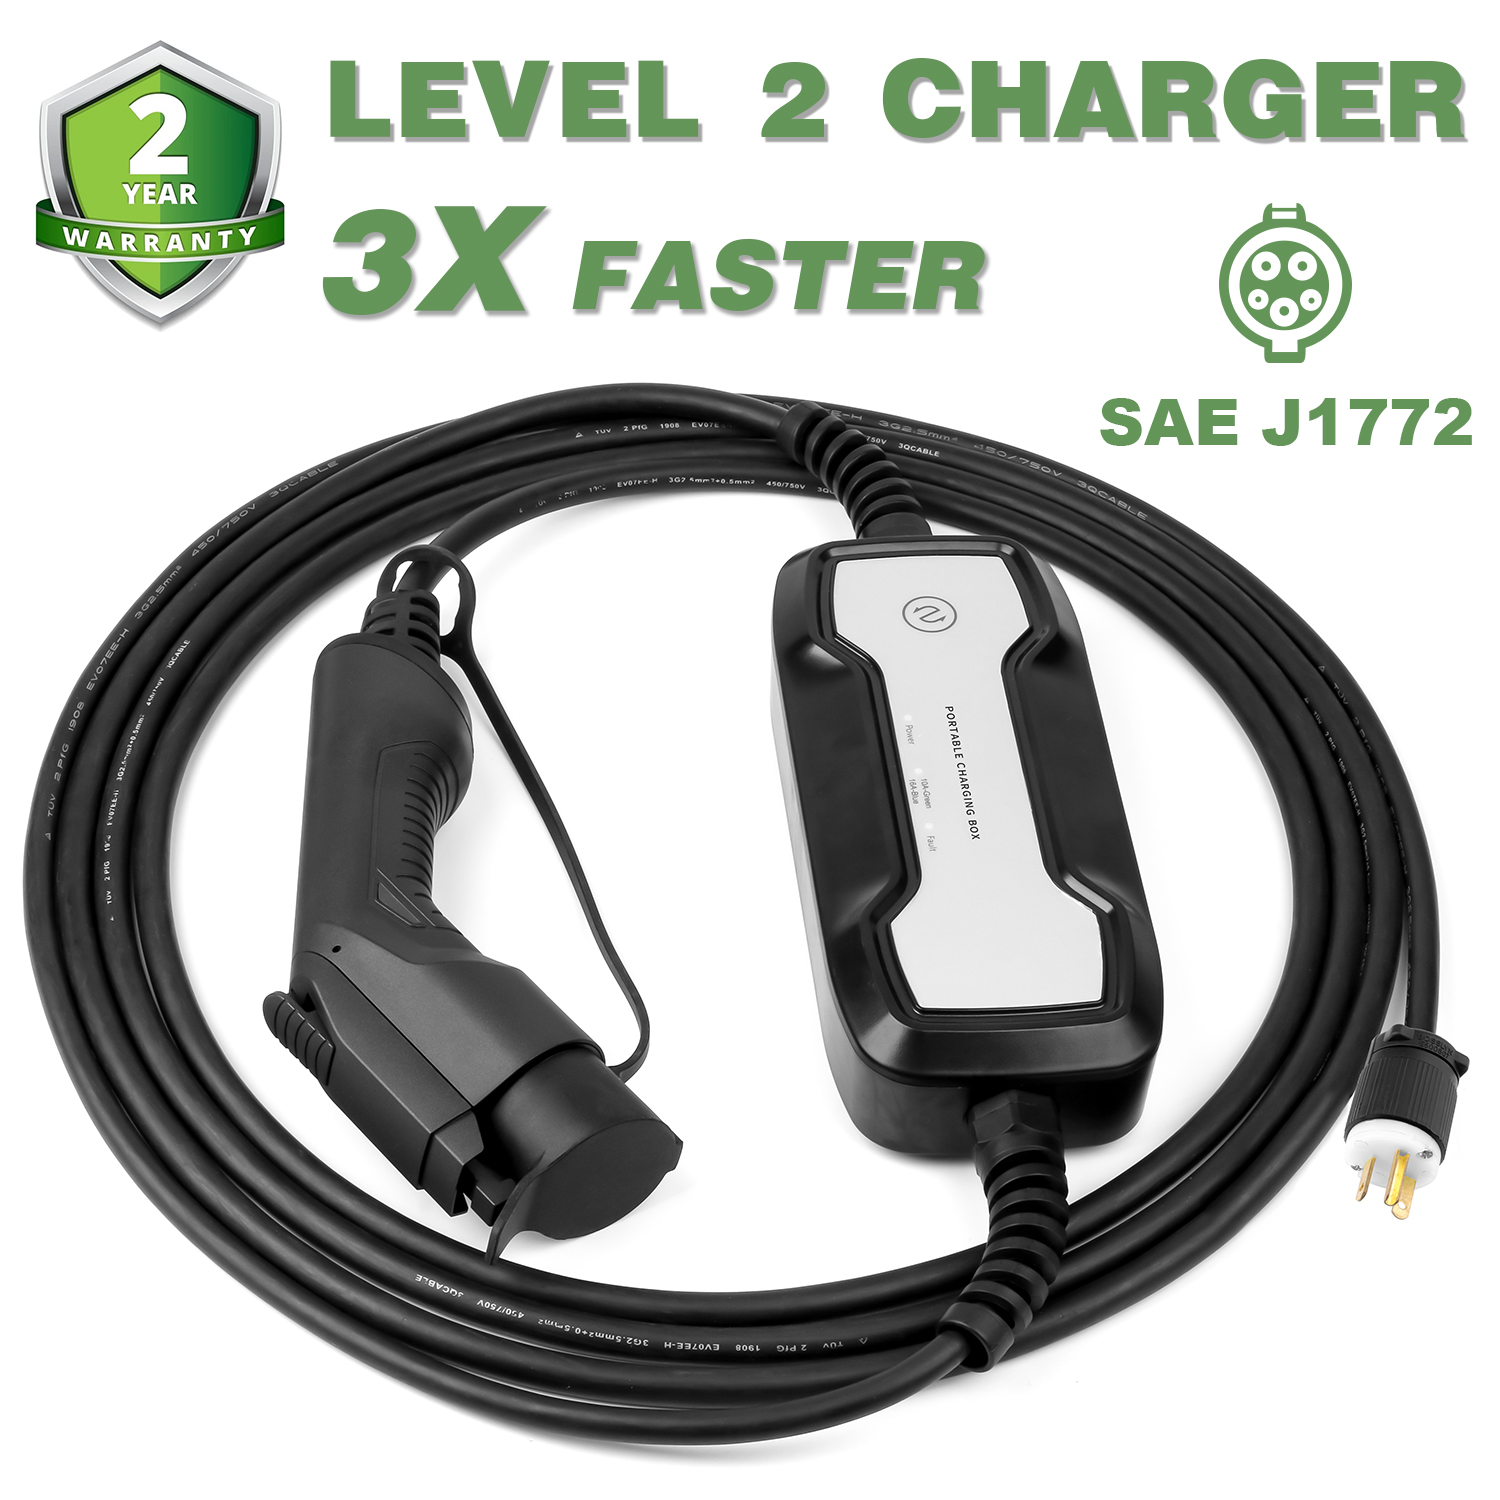 Class 2 Portable EV Charger Electric Car Charger 6-20 Plug Charging Station Electric Vehicle Car Charger Portable 16A Level 2 EV Charging Cable Box NEMA6-20 